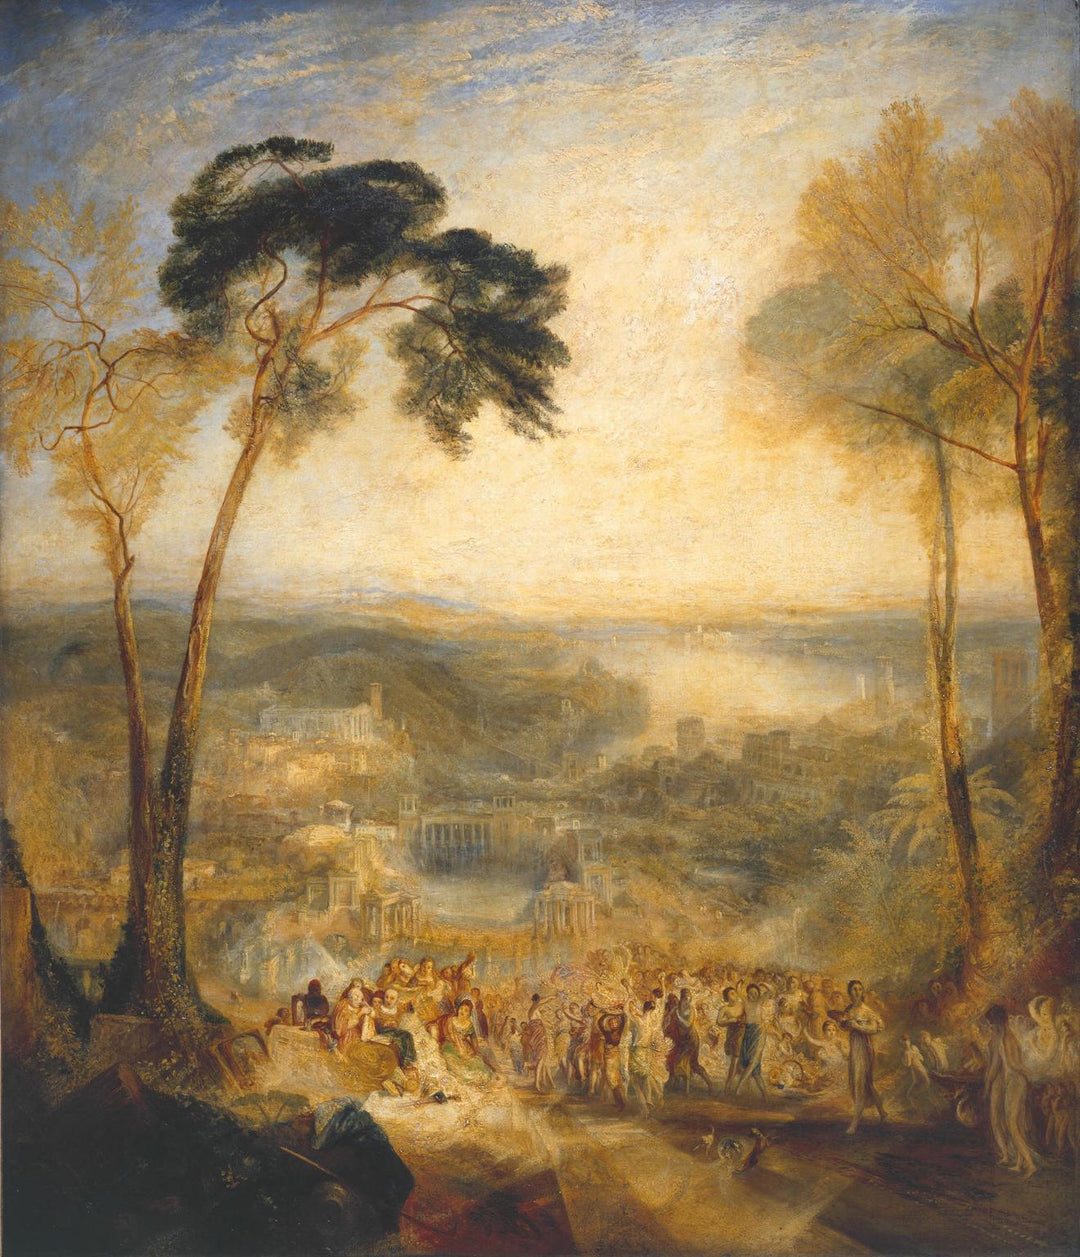 Phryne Going to the Public Baths as Venus,  Demosthenes Taunted by Aeschines by J. M. W. Turner. Seascape painting, Turner artworks, Turner canvas art, J. M. W. Turner oil painting, Turner reproduction for sale. Landscape paintings, Turner art decor, Turner oil painting on canvas, Blue Surf Art